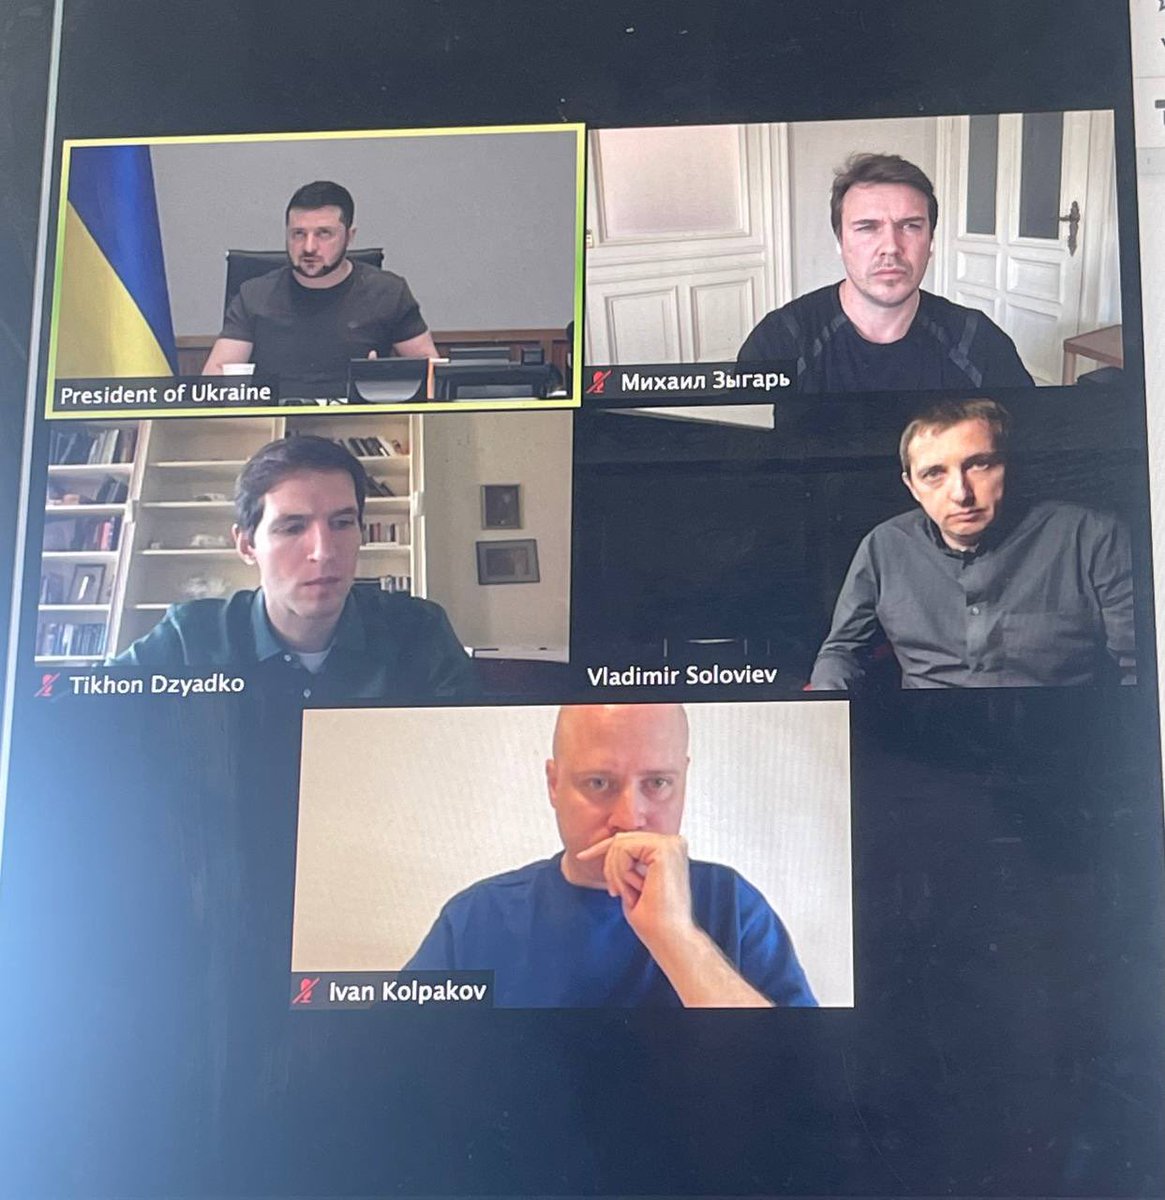 Russia's media censor is warning a group of Russian journalists not to publish an interview they just did with President Zelensky